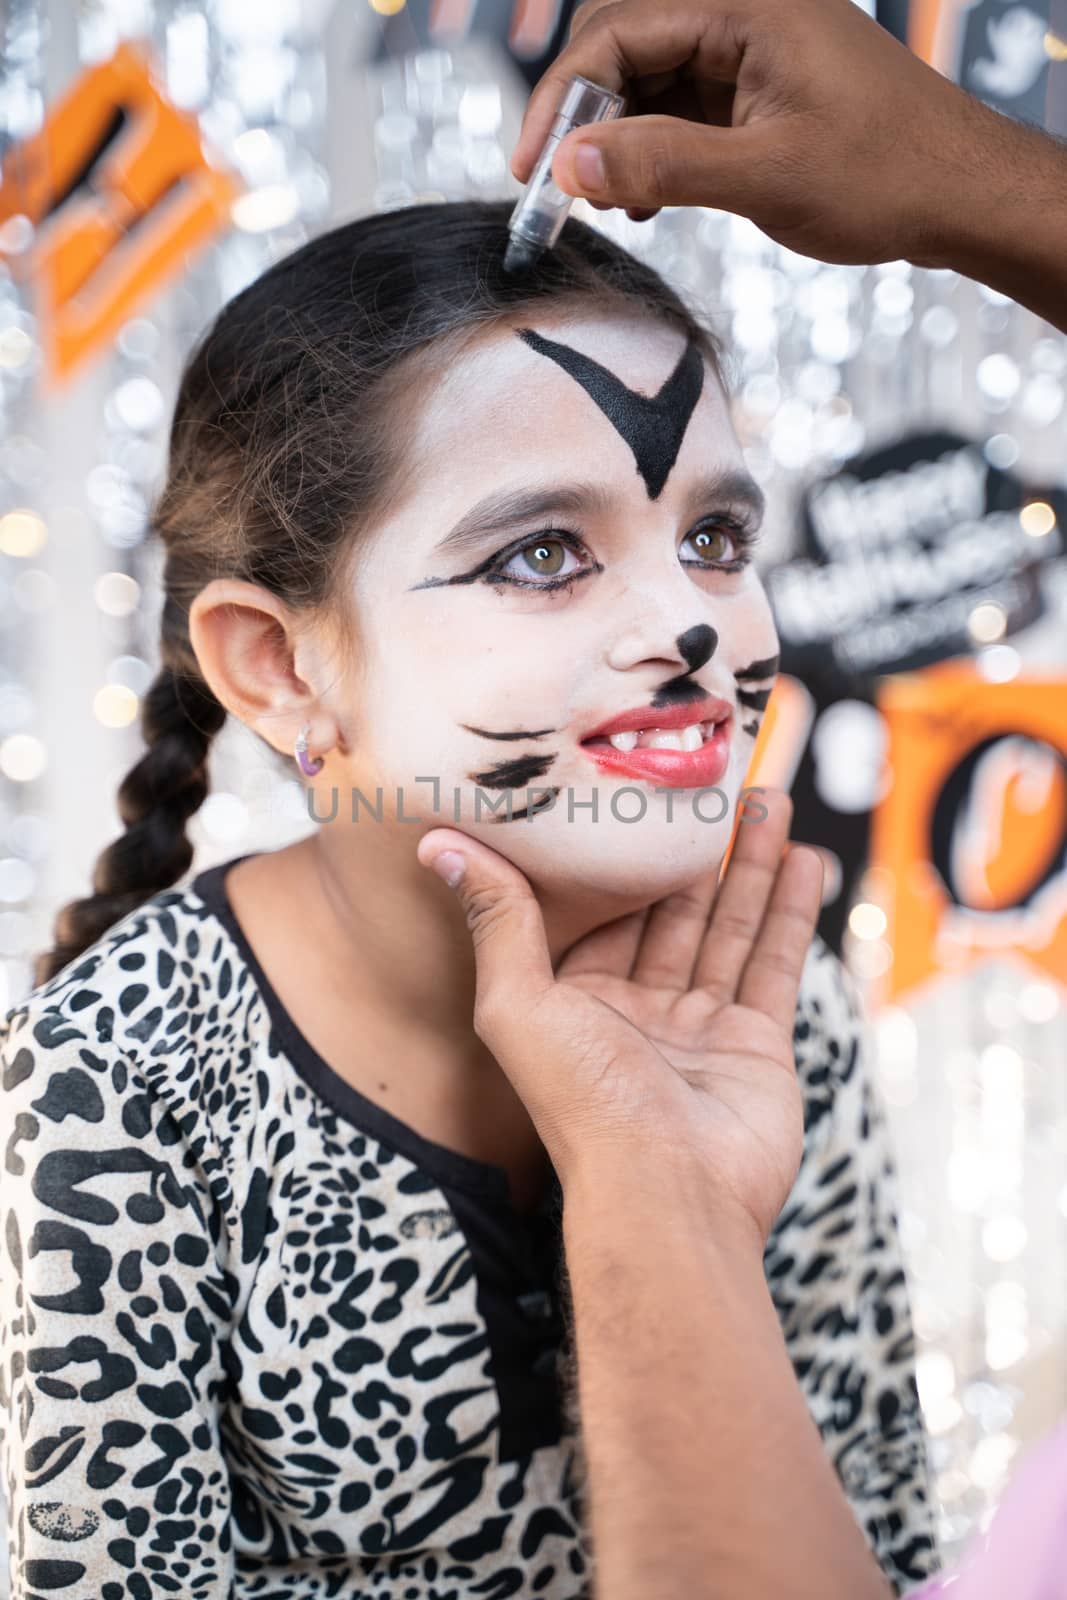 Parent helping her daughter to get ready for Halloween by doing make-up - concept of Halloween, holiday and childhood festival celebration and preparation. by lakshmiprasad.maski@gmai.com